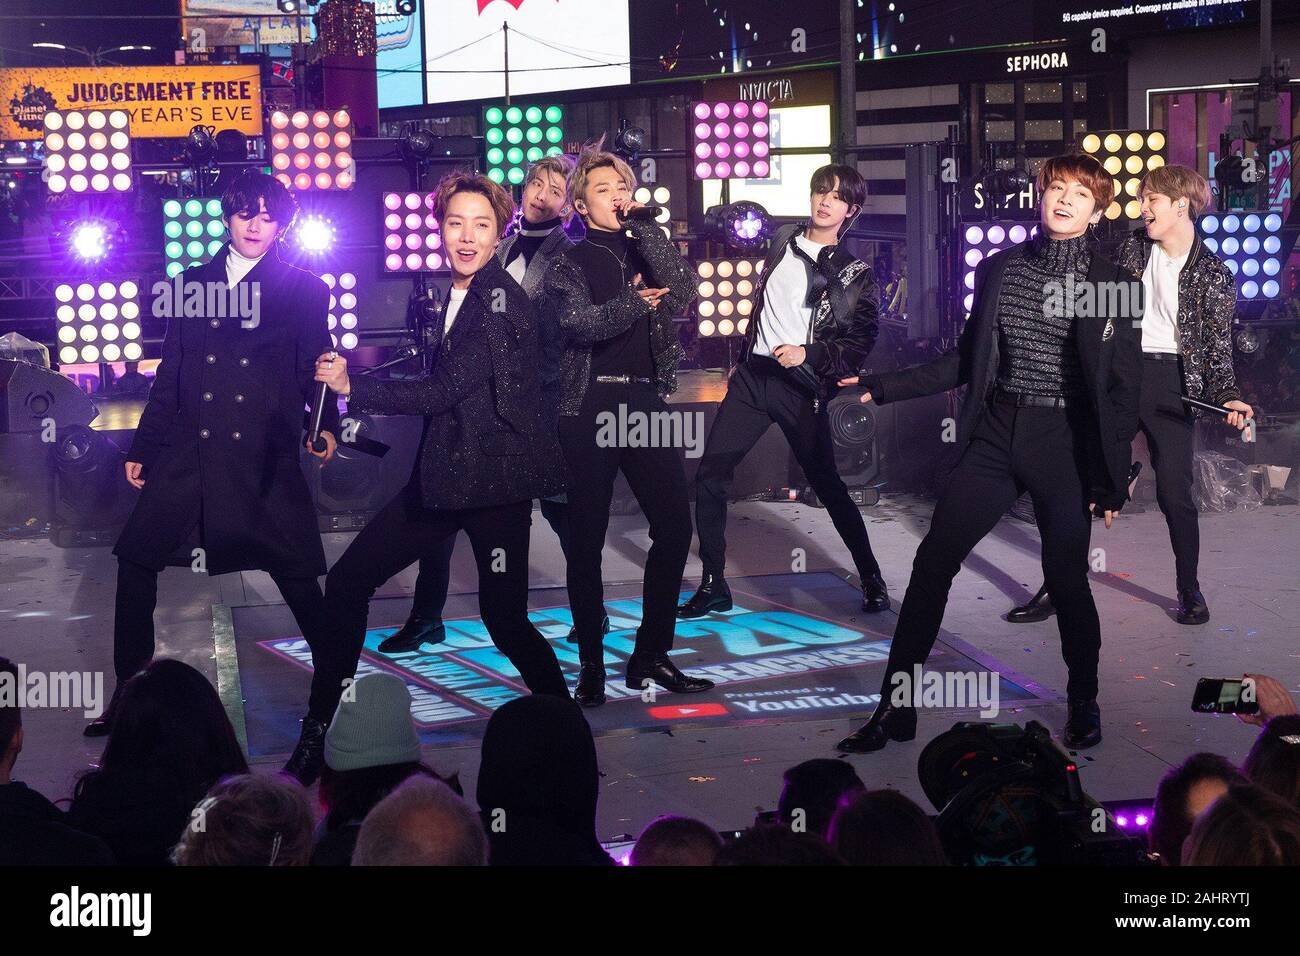 New York, NY, USA. 31st Dec, 2019. BTS in attendance for Times Square New  Year's Eve Ball Drop Countdown Celebration, Duffy Square, New York, NY  December 31, 2019. Credit: RCF/Everett Collection/Alamy Live